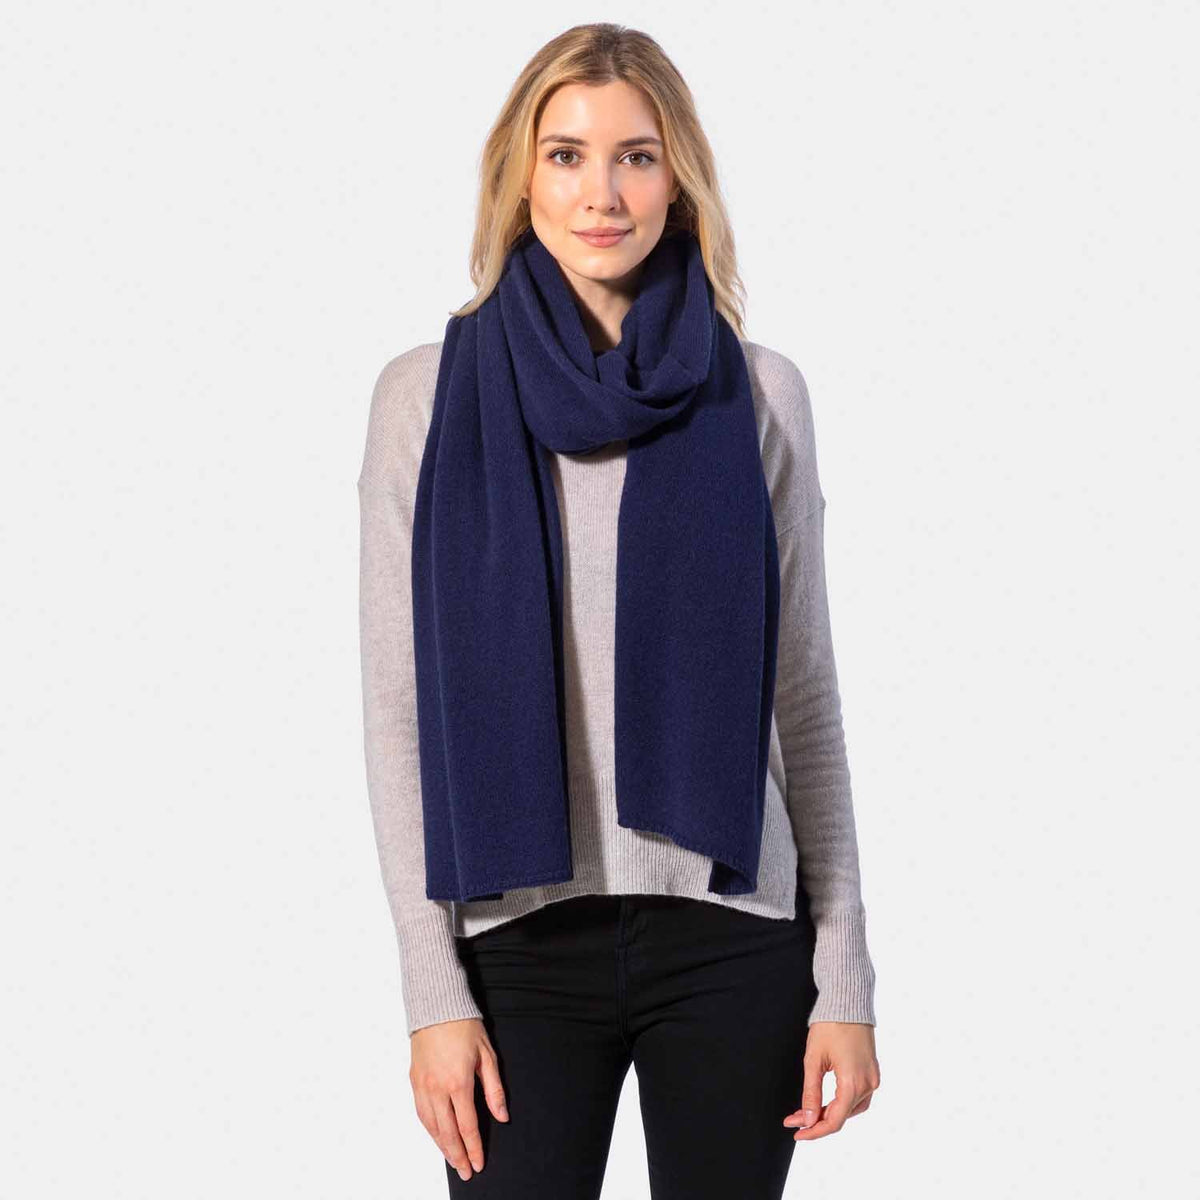 Picture of a woman wearing a navy cashmere jersey knitted oversize scarf or travel wrap.